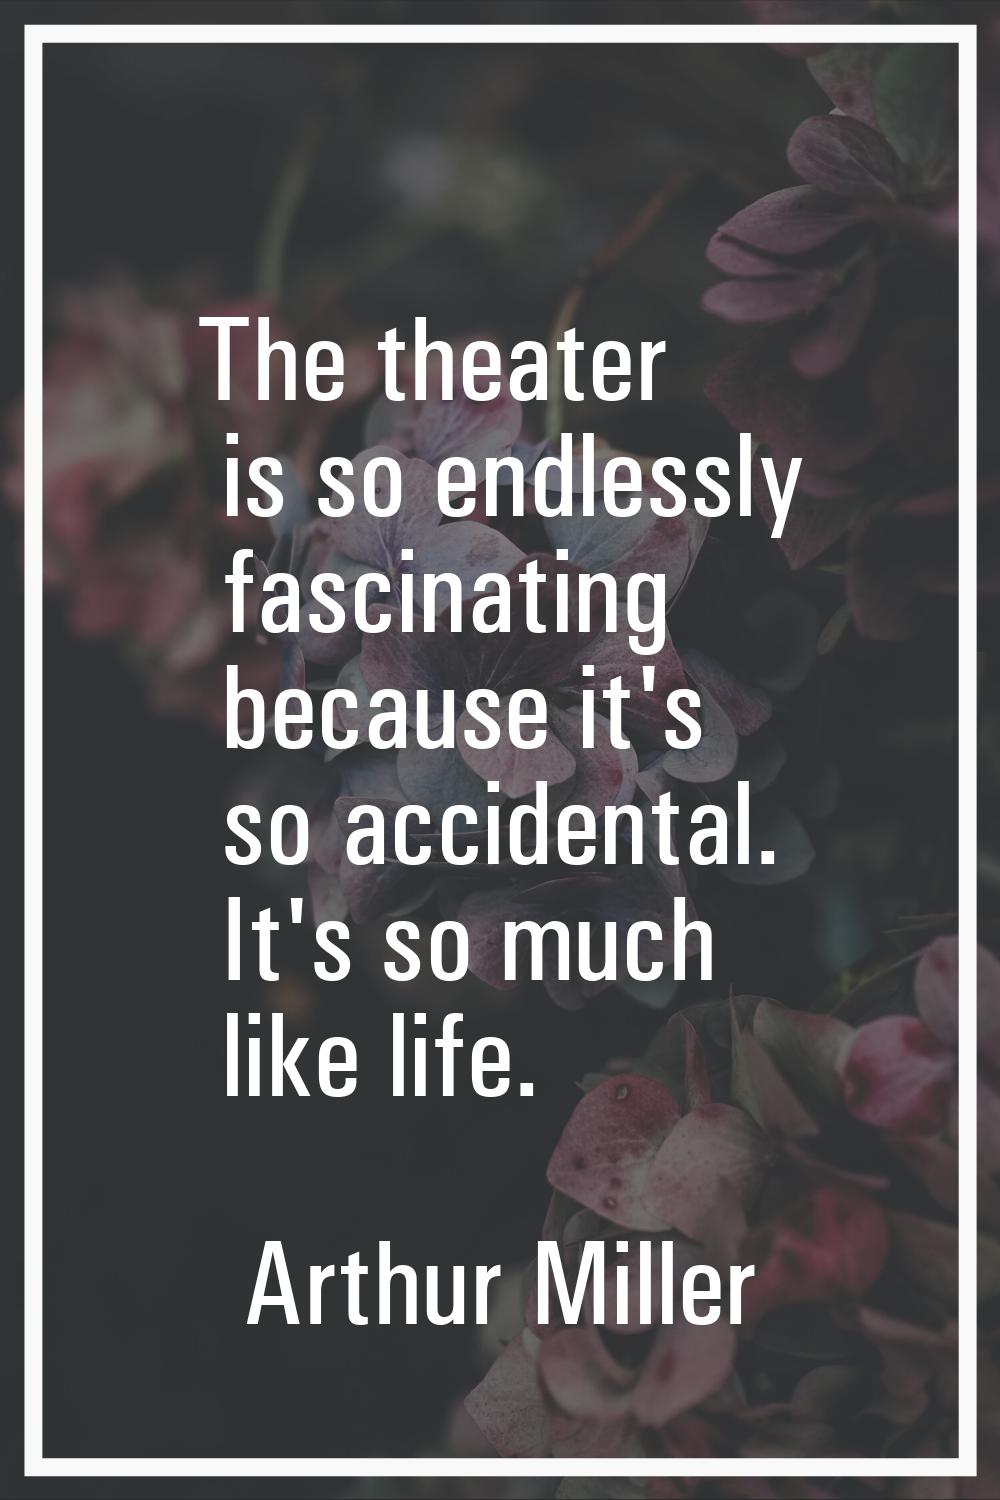 The theater is so endlessly fascinating because it's so accidental. It's so much like life.